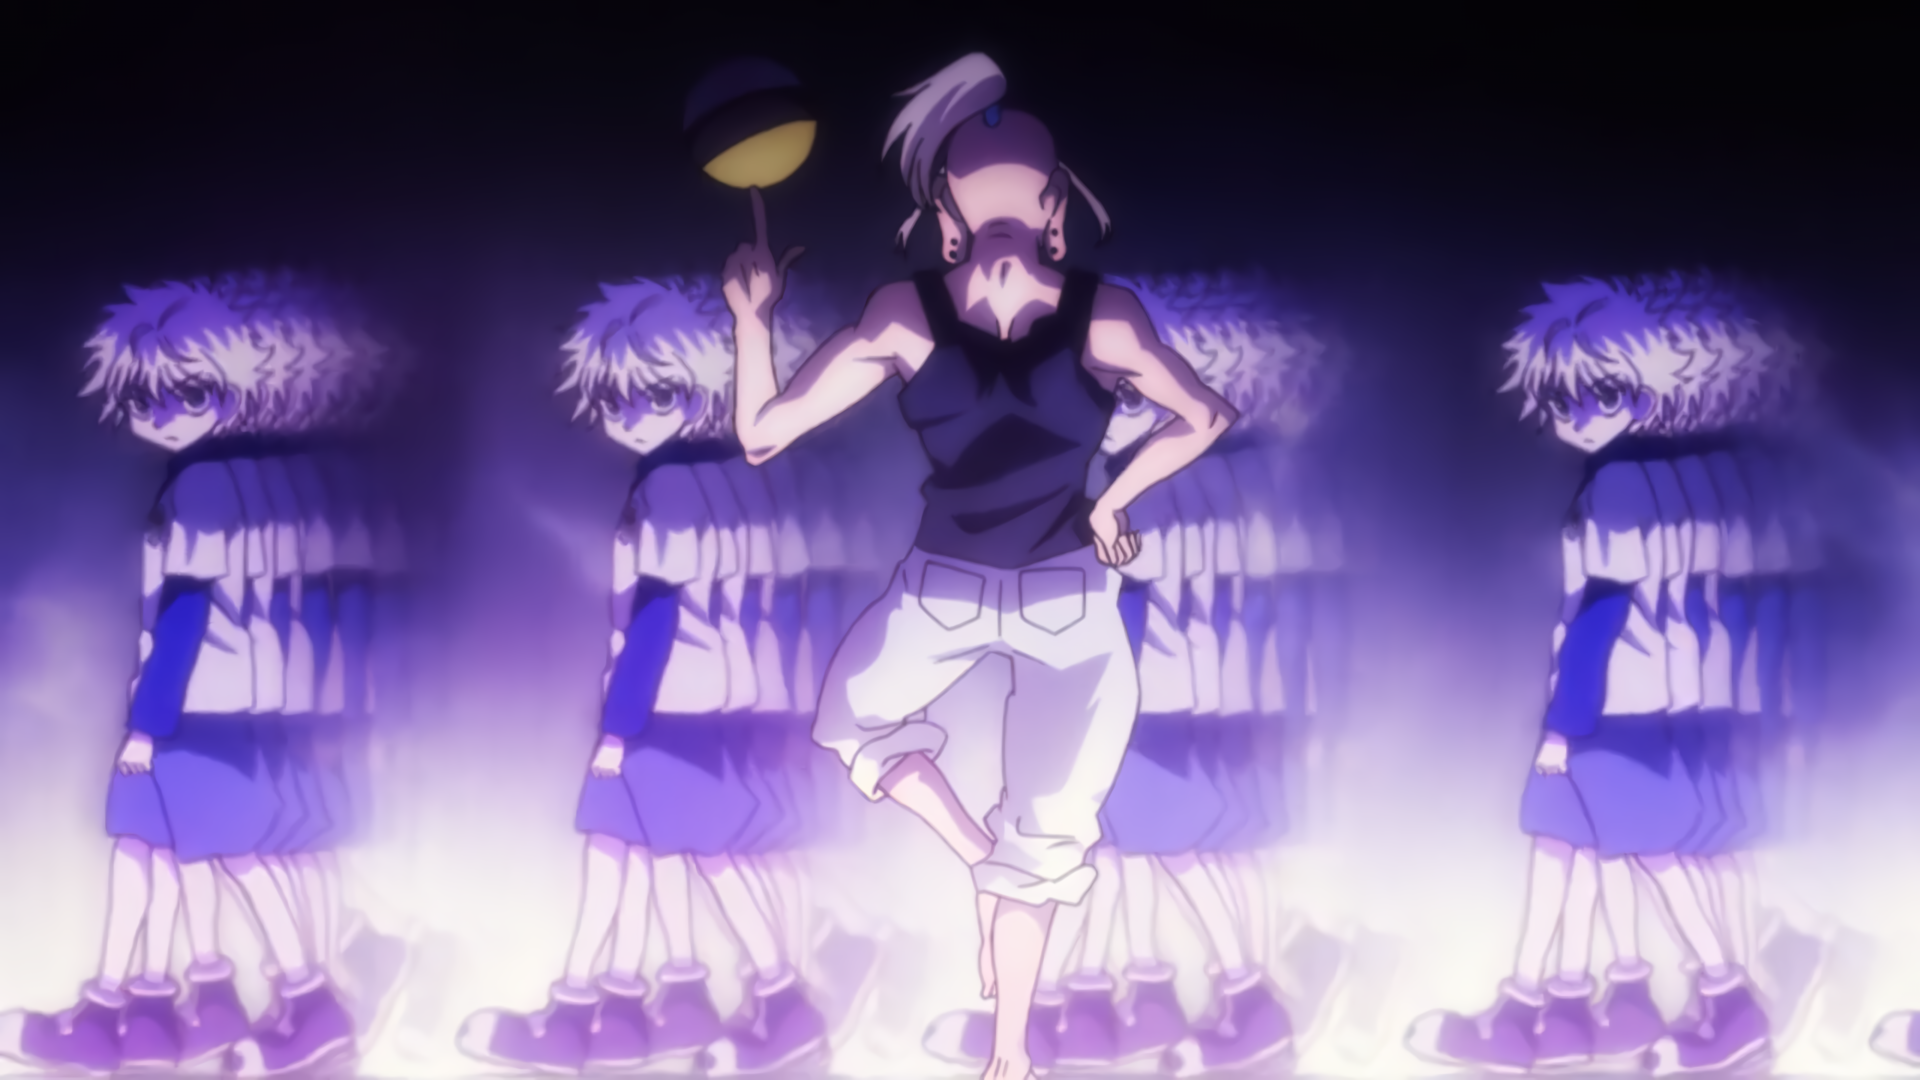 Hunter X Hunter - Episode 7 [English Subbed]  Hunter X Hunter - Episode 7  [English Subbed] Gon Freecss aspires to become a Hunter, an exceptional  being capable of greatness. With his